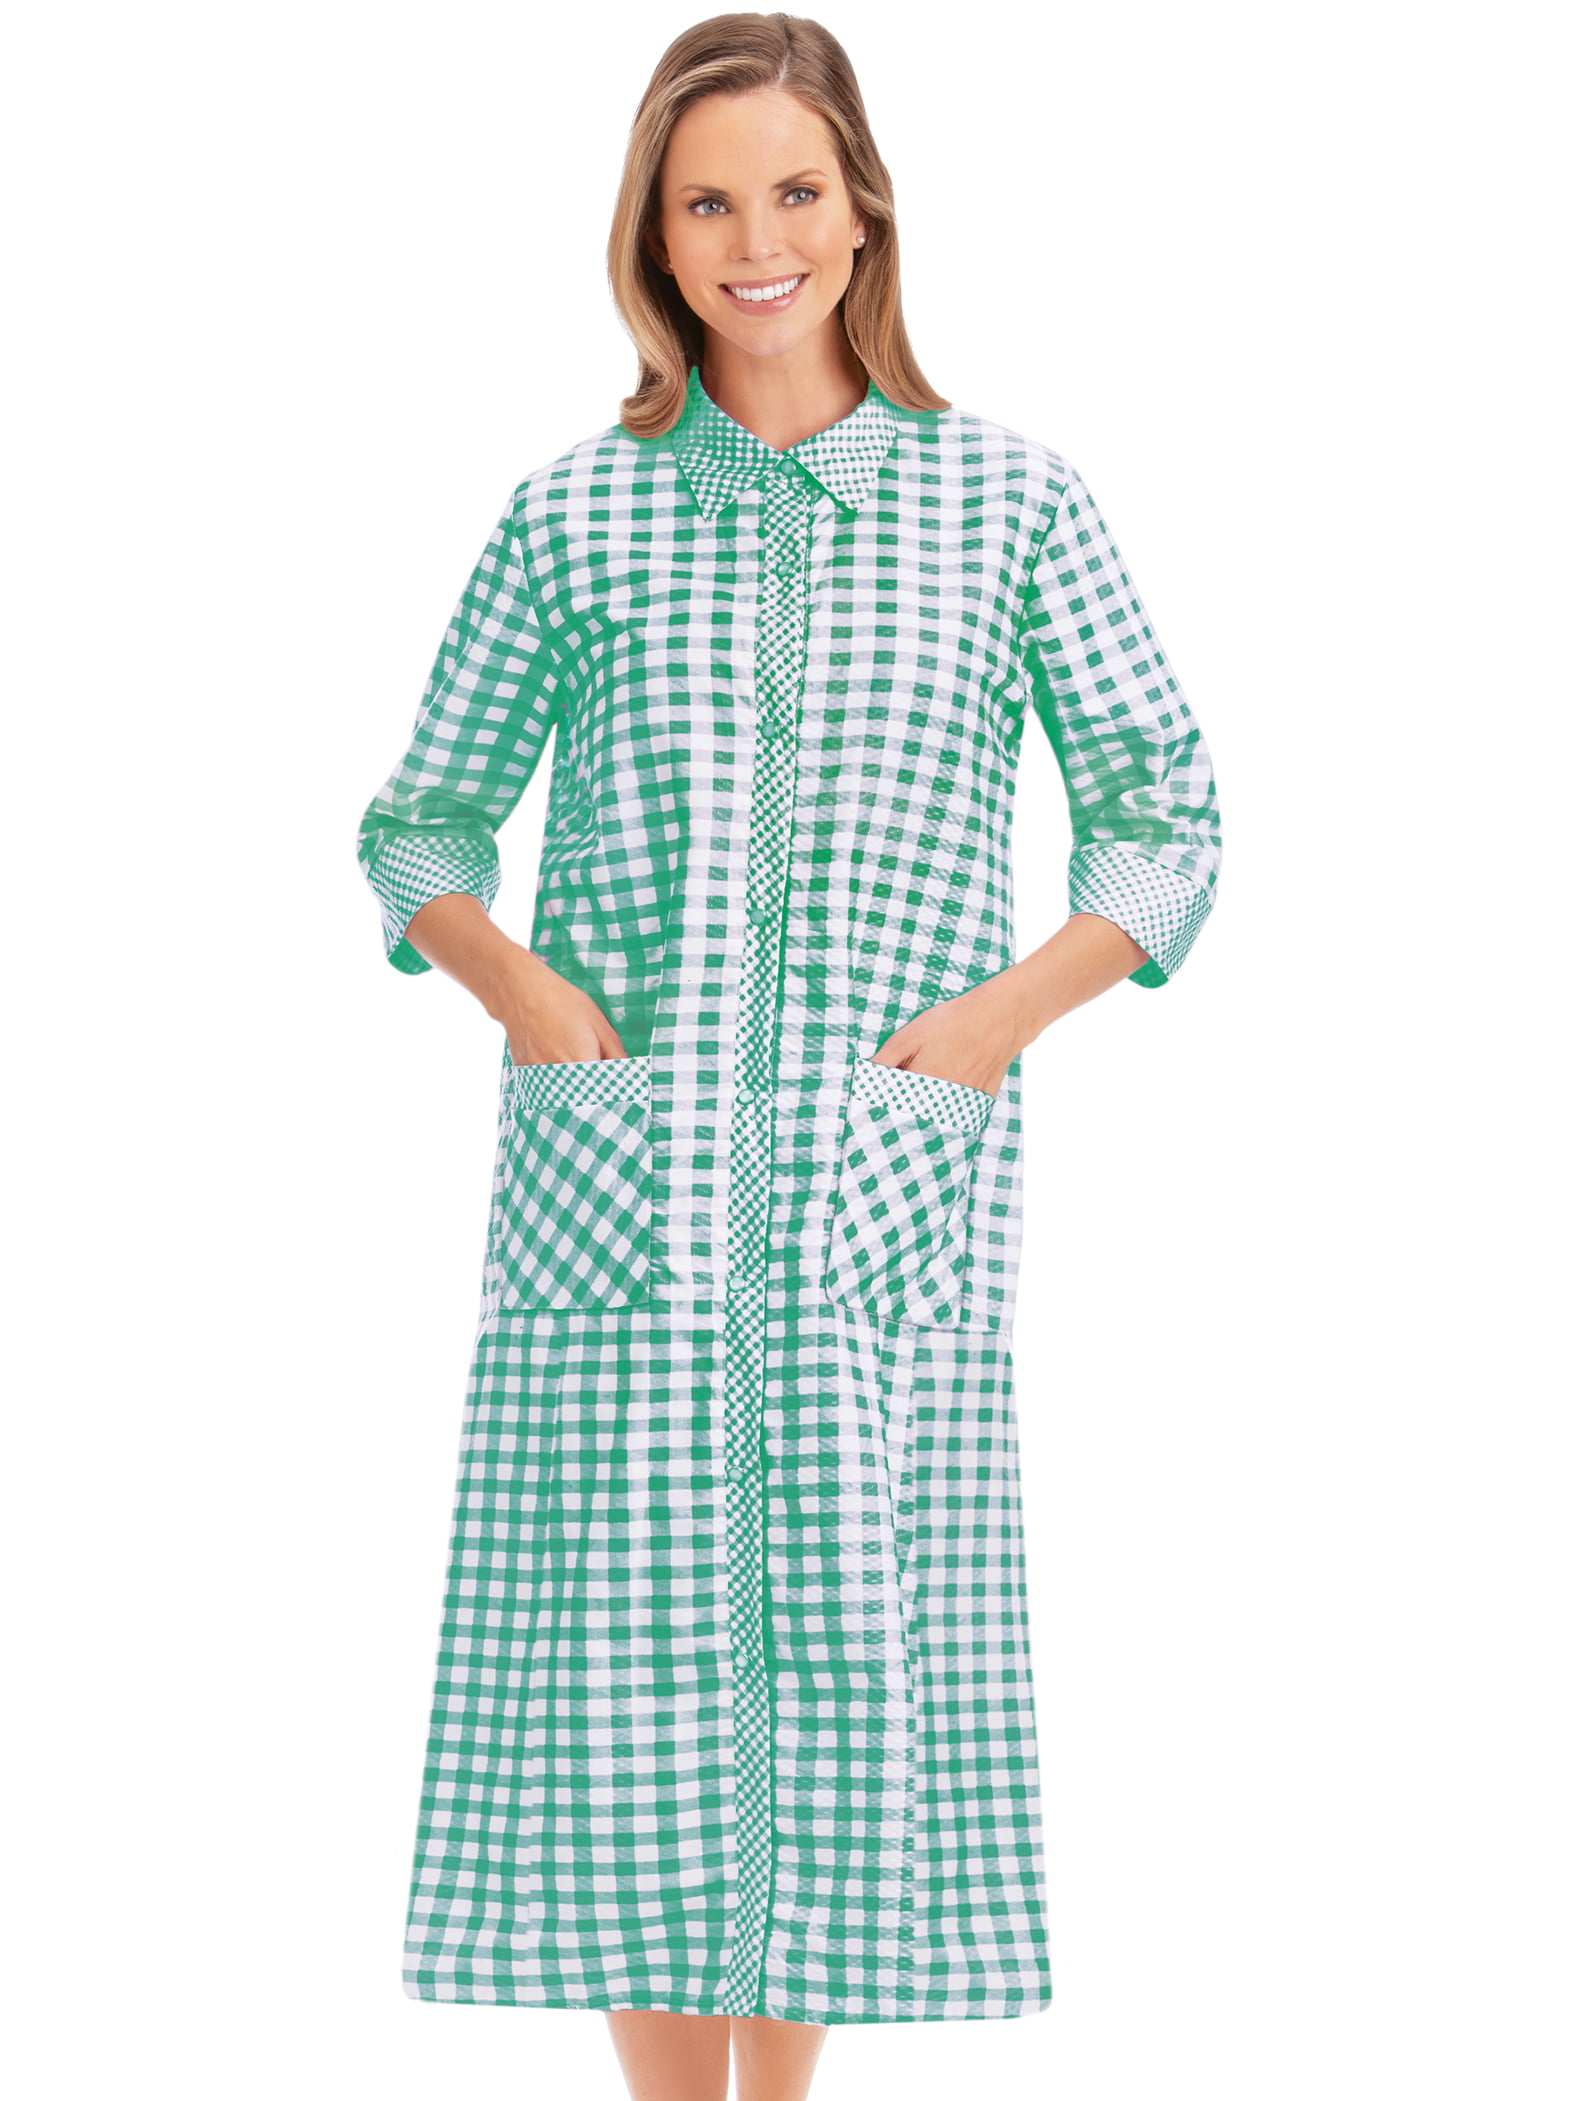 Only Necessities Womens Nightgown Robe Duster M 14/16 Gingham Snap Cotton Blend